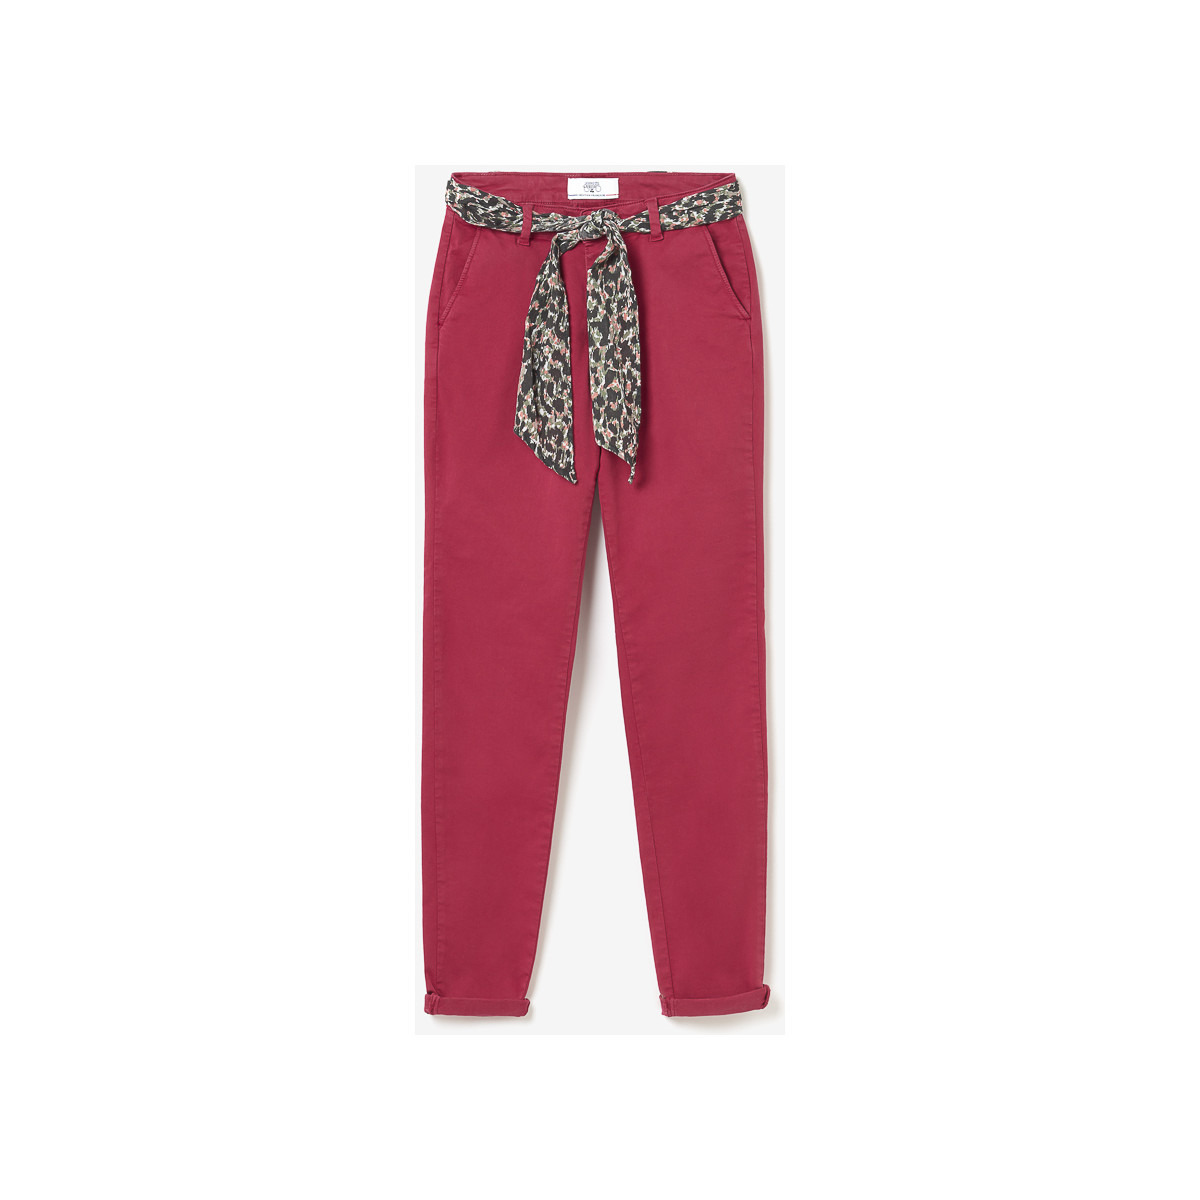 Spartoo - Women's Chino Pants in Red GOOFASH